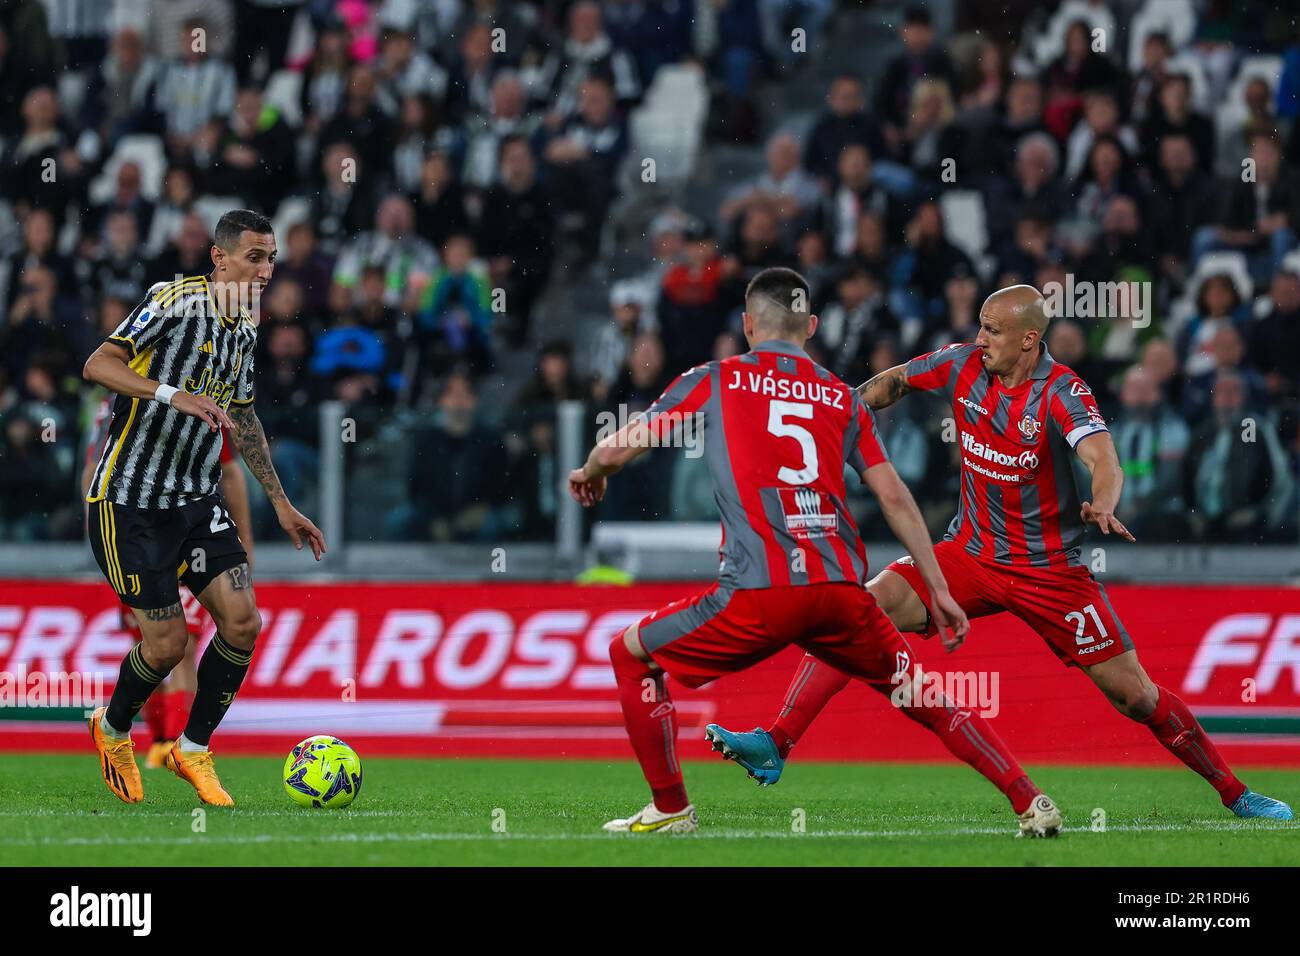 Turin, Italy. 14th May, 2023. Angel Di Maria of Juventus FC (L), Johan Vasquez (C) and Vlad Chiriches of US Cremonese (R) in action during Serie A 2022/23 football match between Juventus FC and US Cremonese at the Allianz Stadium. Final score; Juventus 2:0 Cremonese. Credit: SOPA Images Limited/Alamy Live News Stock Photo